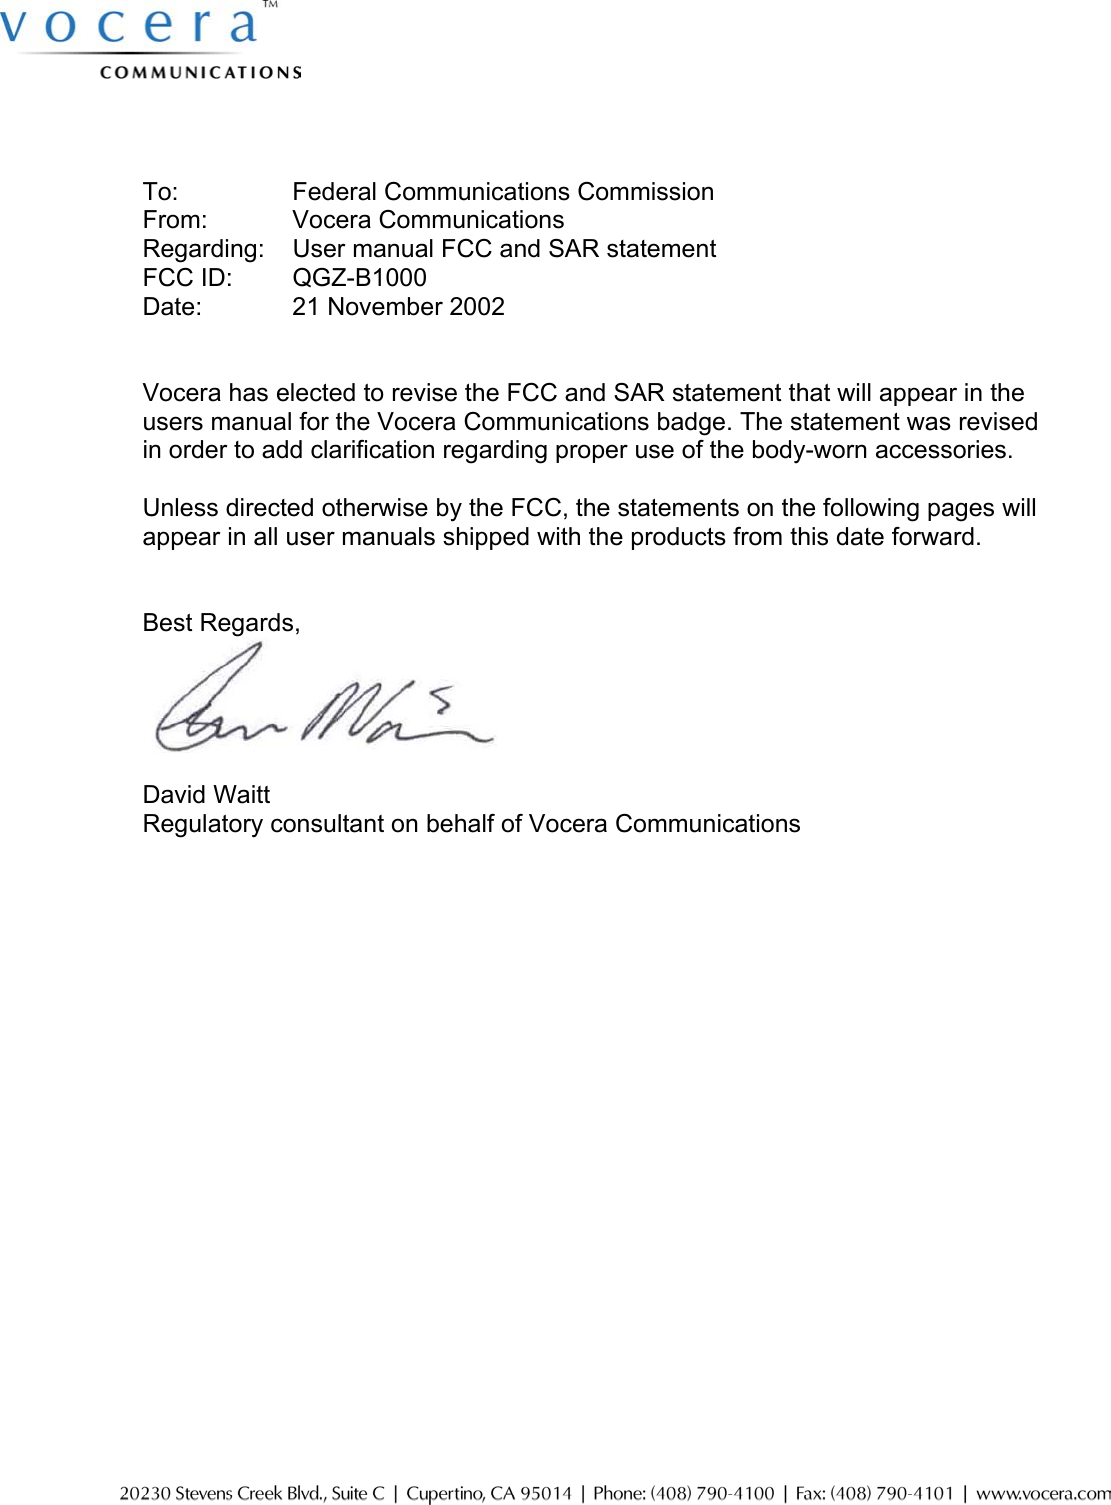      To:    Federal Communications Commission From:    Vocera Communications Regarding:  User manual FCC and SAR statement FCC ID:  QGZ-B1000 Date:    21 November 2002   Vocera has elected to revise the FCC and SAR statement that will appear in the users manual for the Vocera Communications badge. The statement was revised in order to add clarification regarding proper use of the body-worn accessories.    Unless directed otherwise by the FCC, the statements on the following pages will appear in all user manuals shipped with the products from this date forward.   Best Regards,      David Waitt Regulatory consultant on behalf of Vocera Communications     